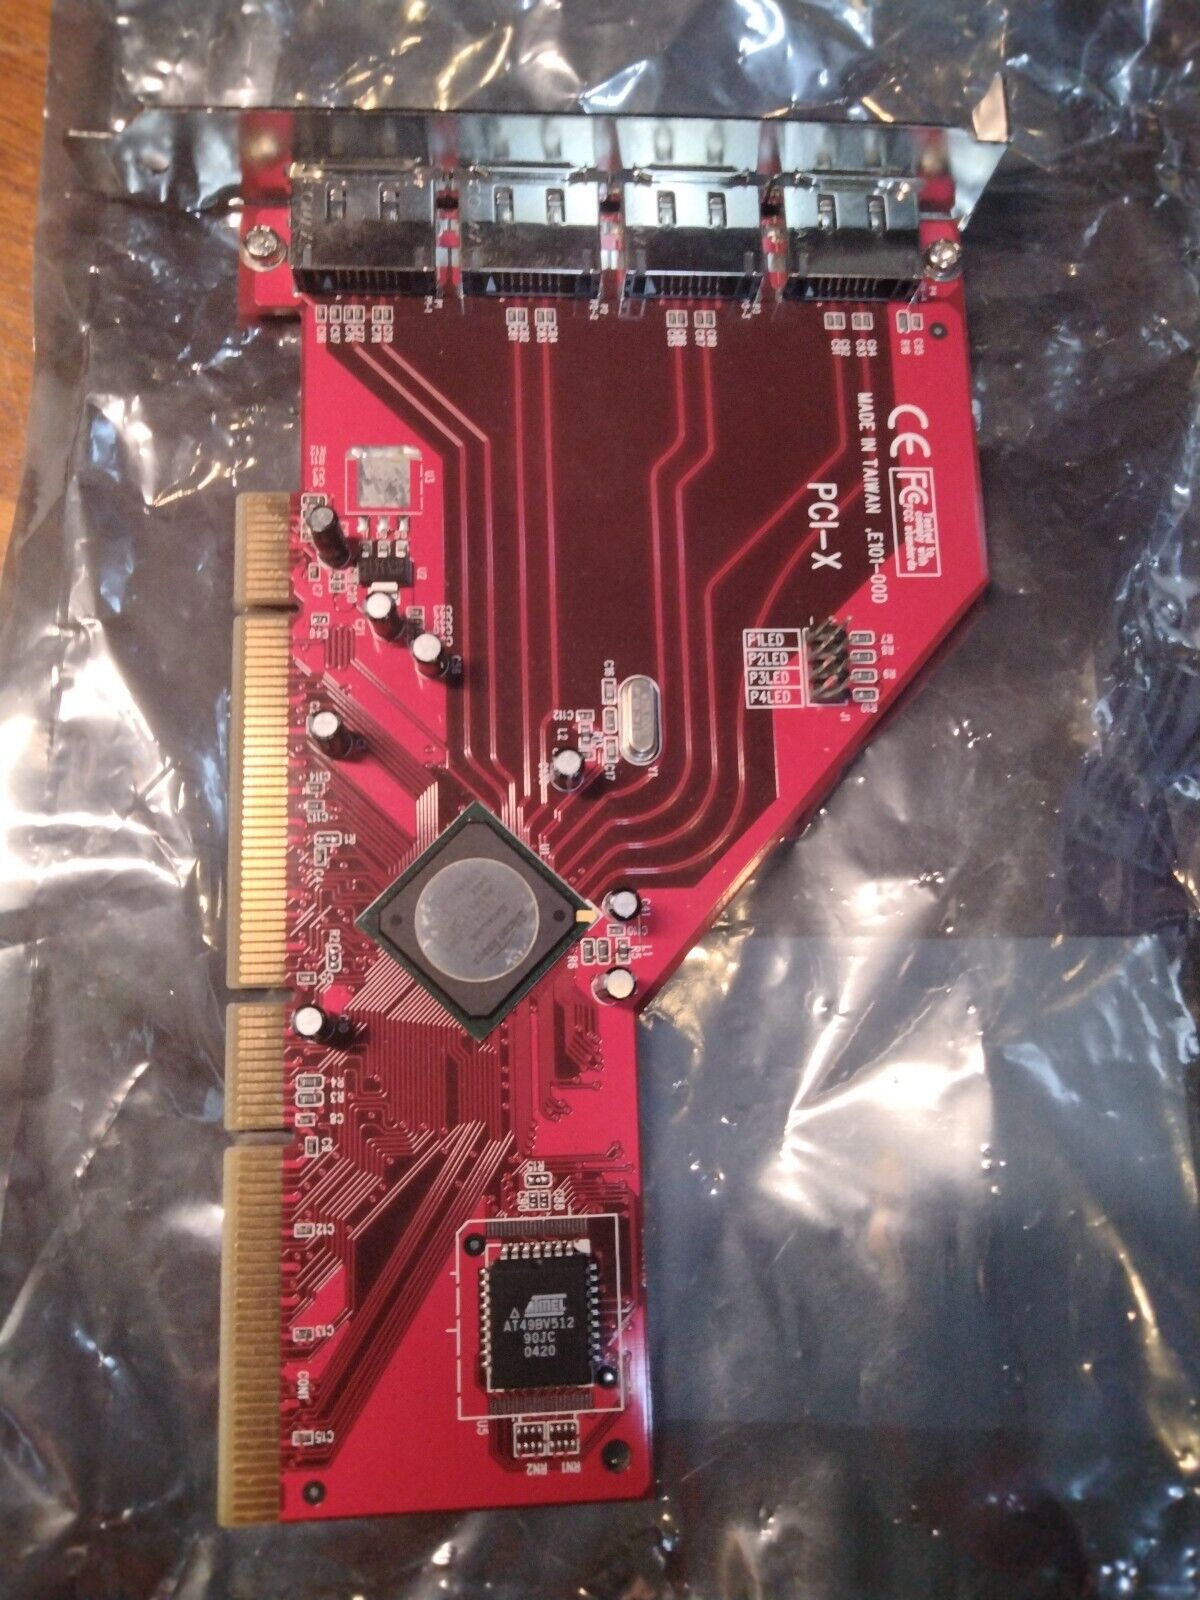 SI PCI-X eSATA card, working when pulled from service.